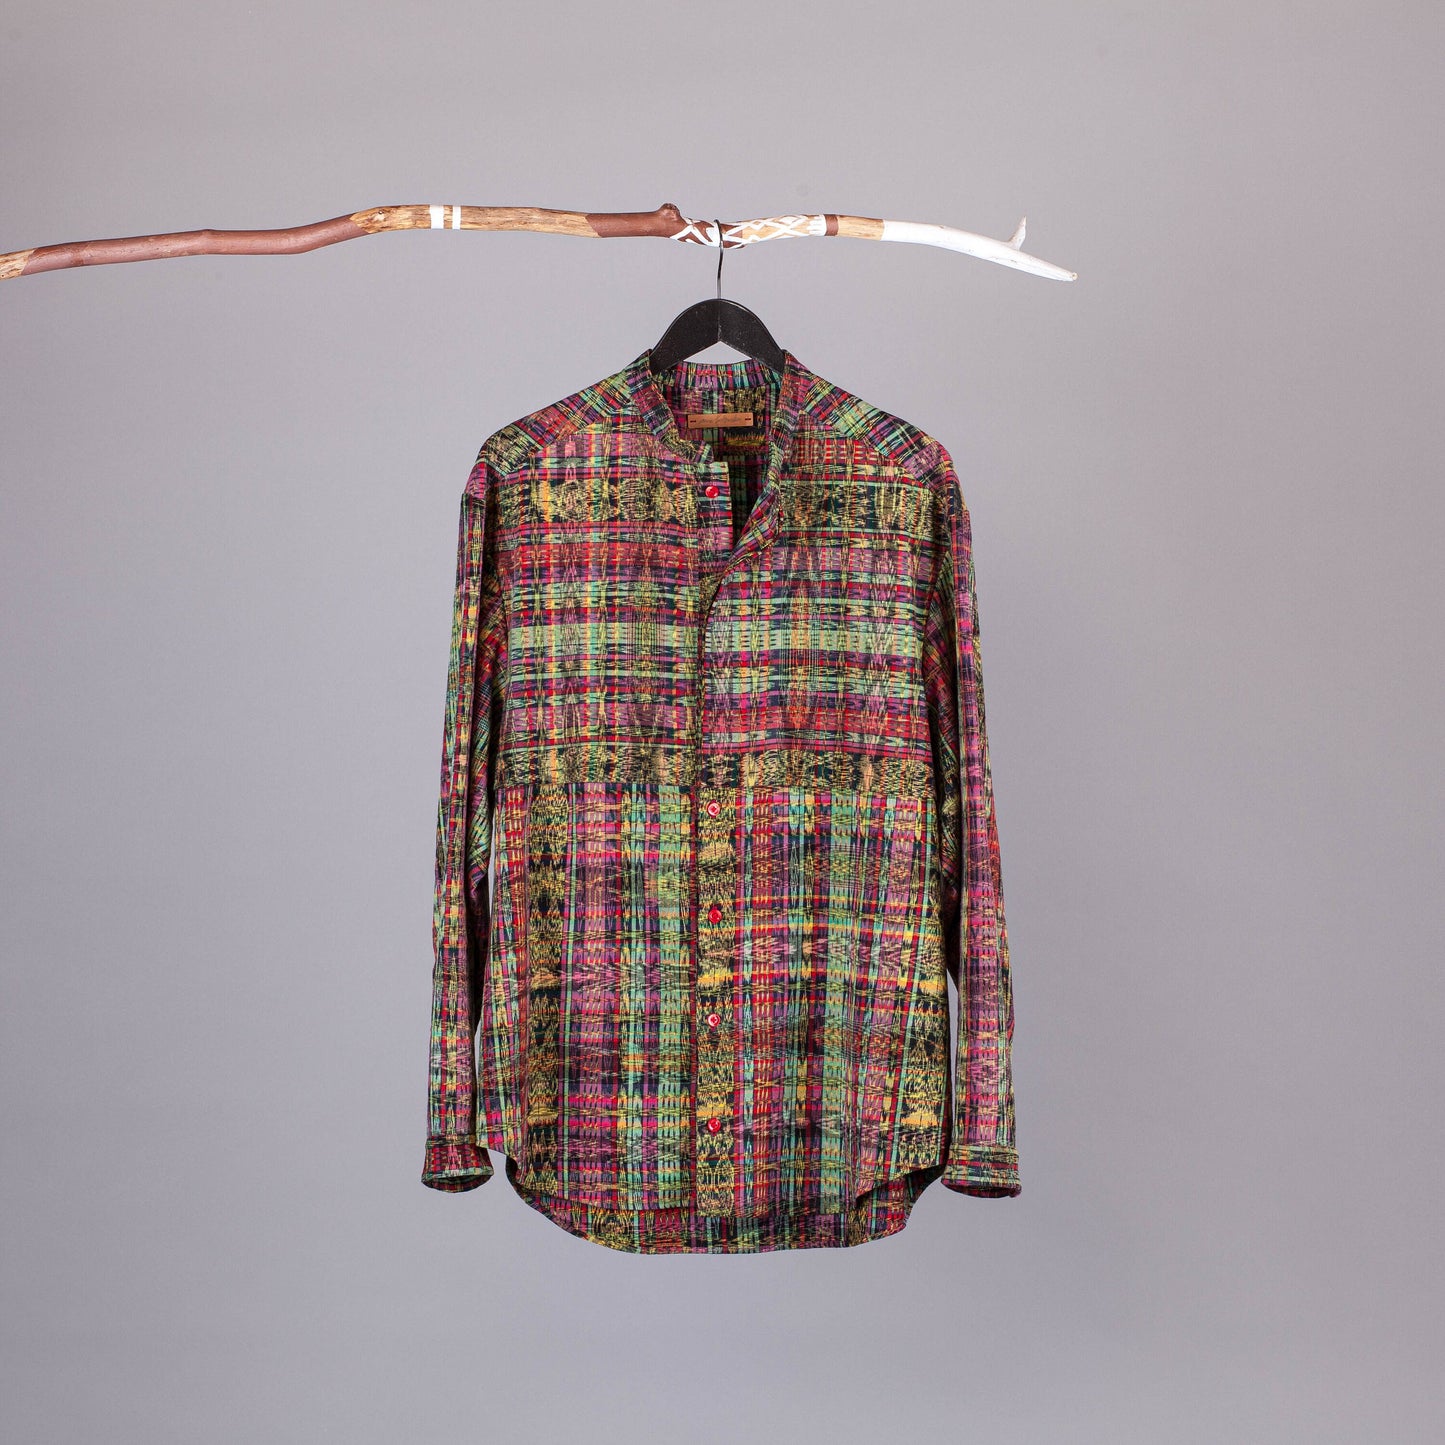 The Lookout Shirt No.1, shirt for men, unique piece made from hand-woven fabrics, fairly traded